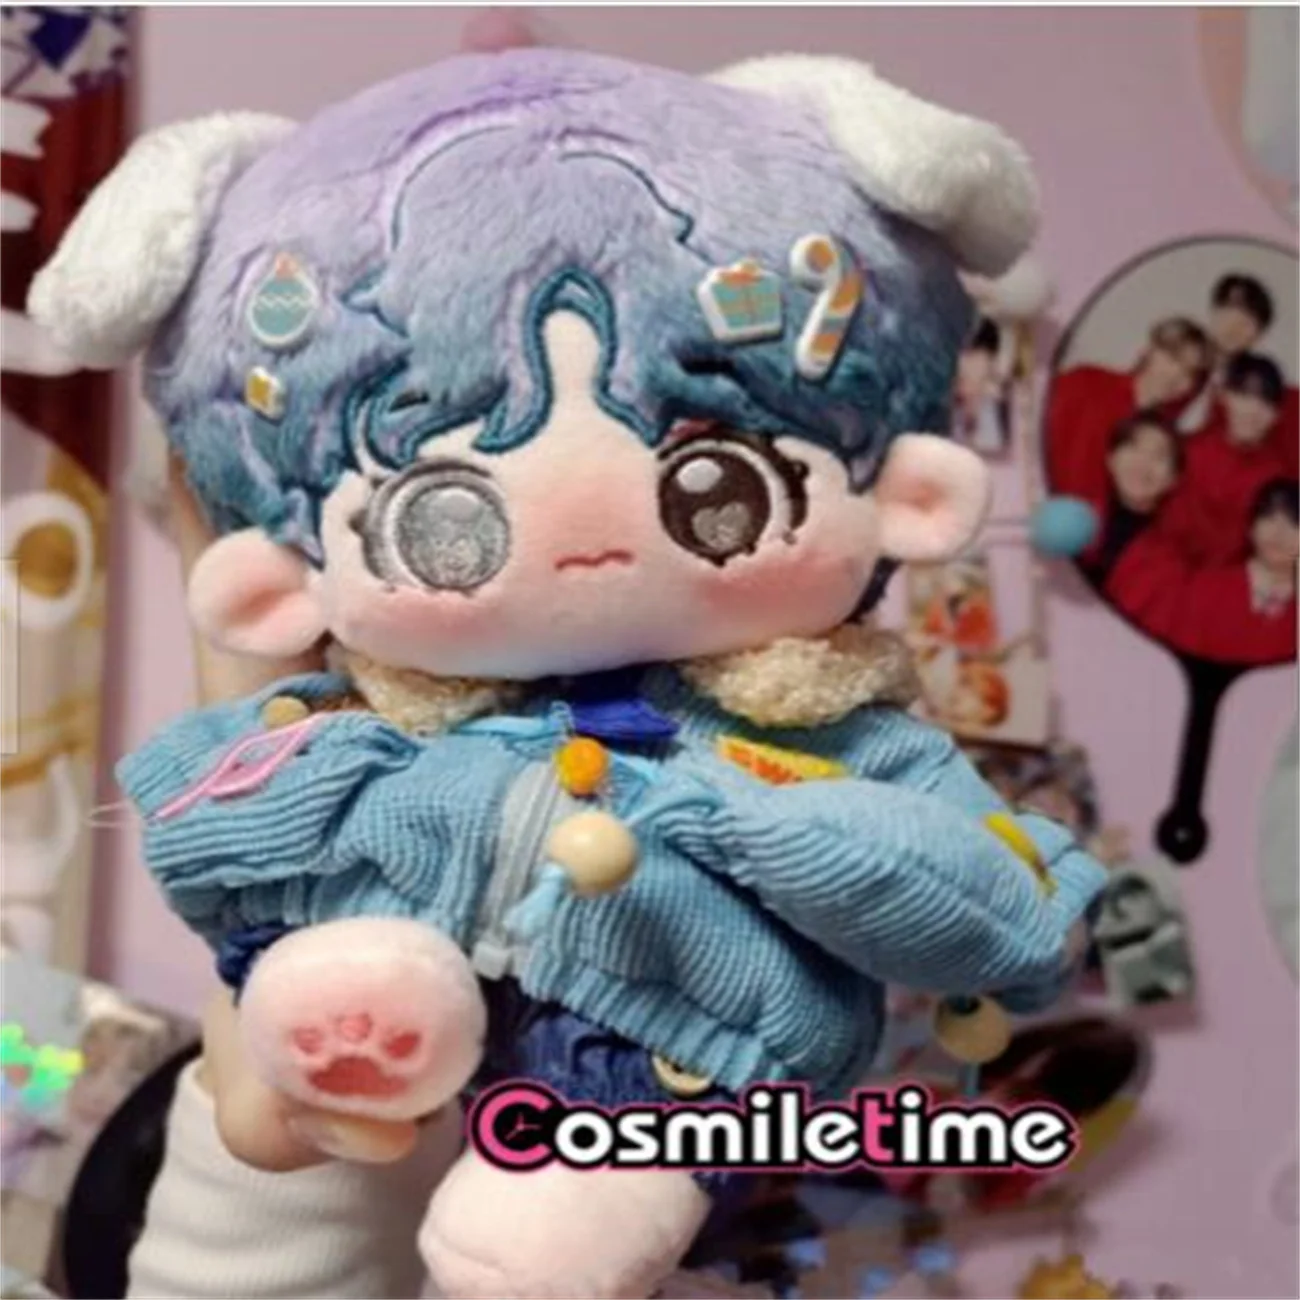 

Cute Kpop Star Kim Tae Hyung Soft Plush 20cm Doll Stuffed Toys Gifts Cosplay Children's Toys For Girl Anime Toys Figure Gifts